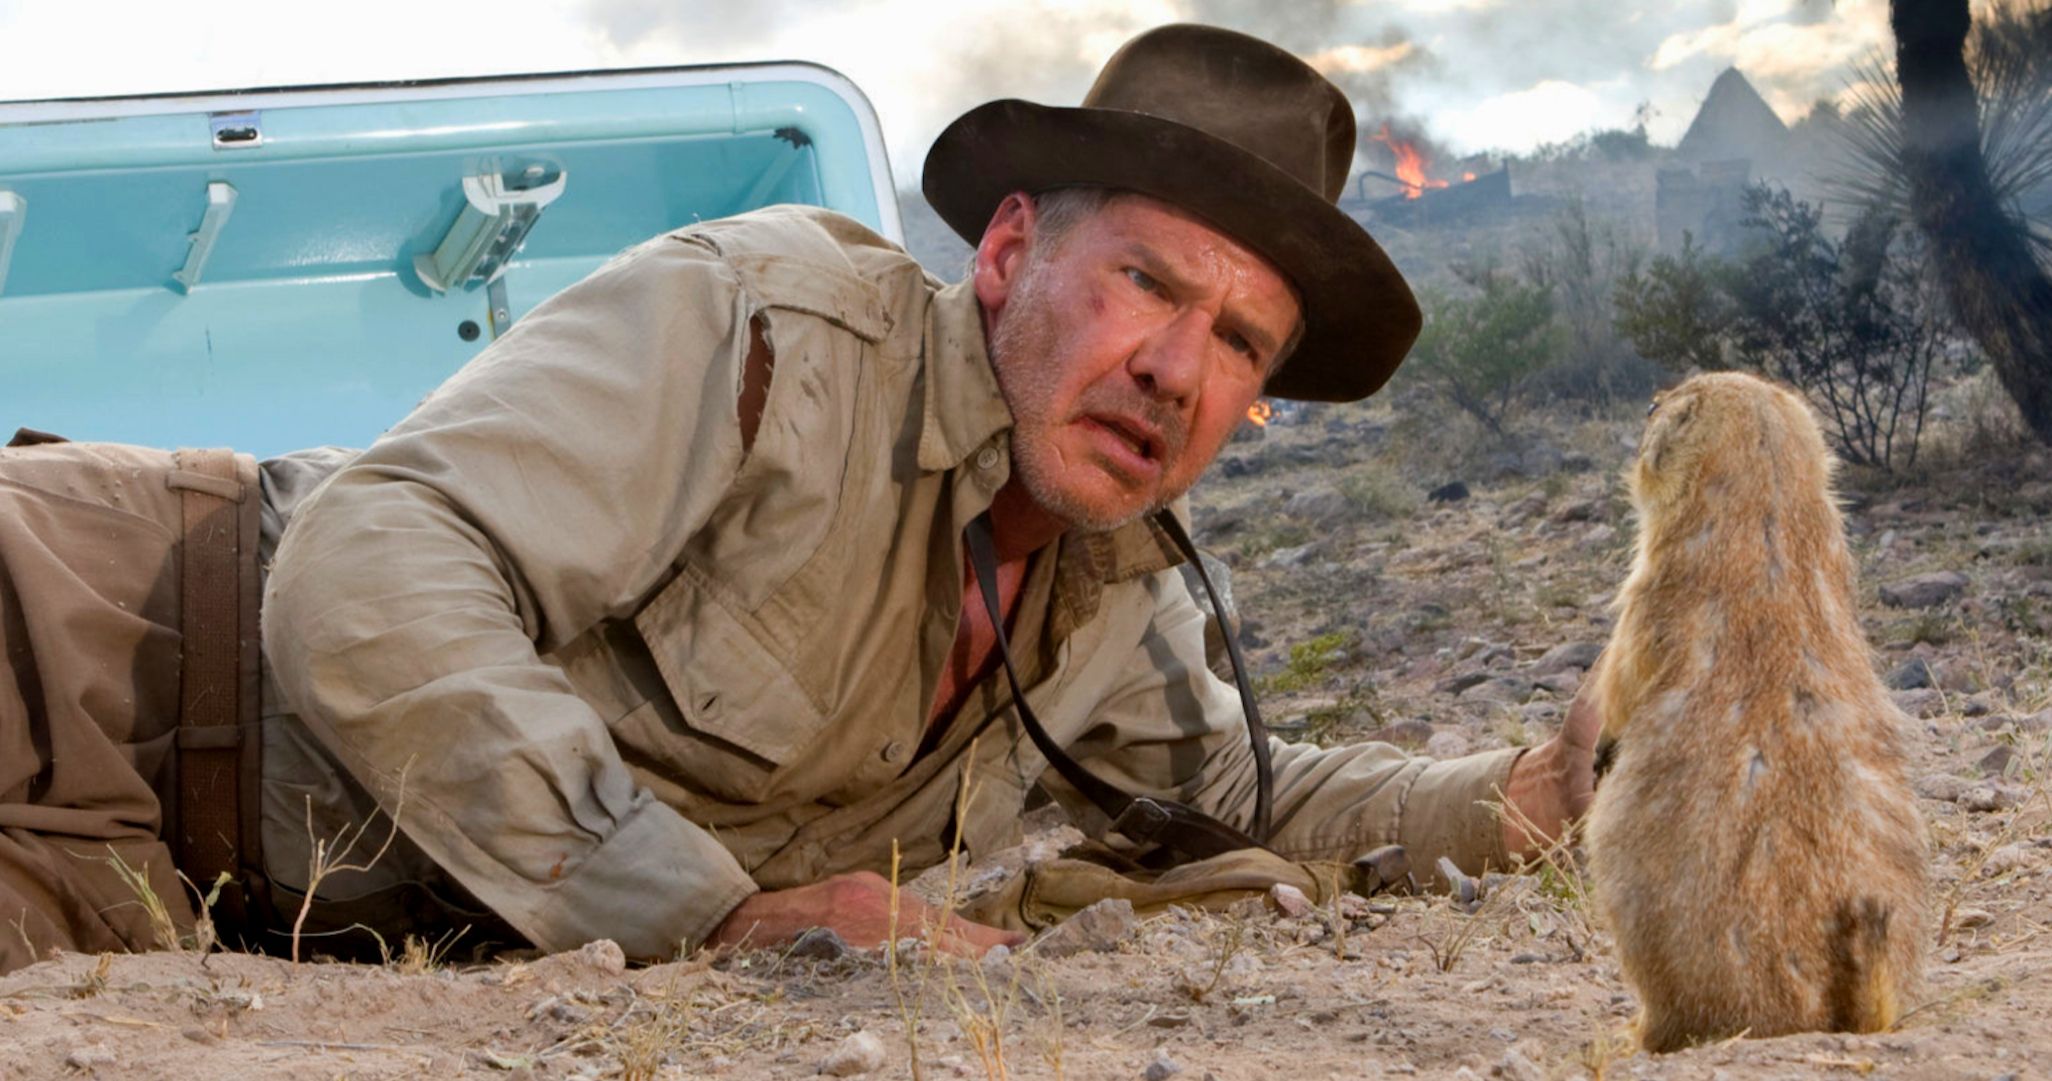 Harrison Ford Trends on His 79th Birthday Following Indiana Jones 5 Set Injury